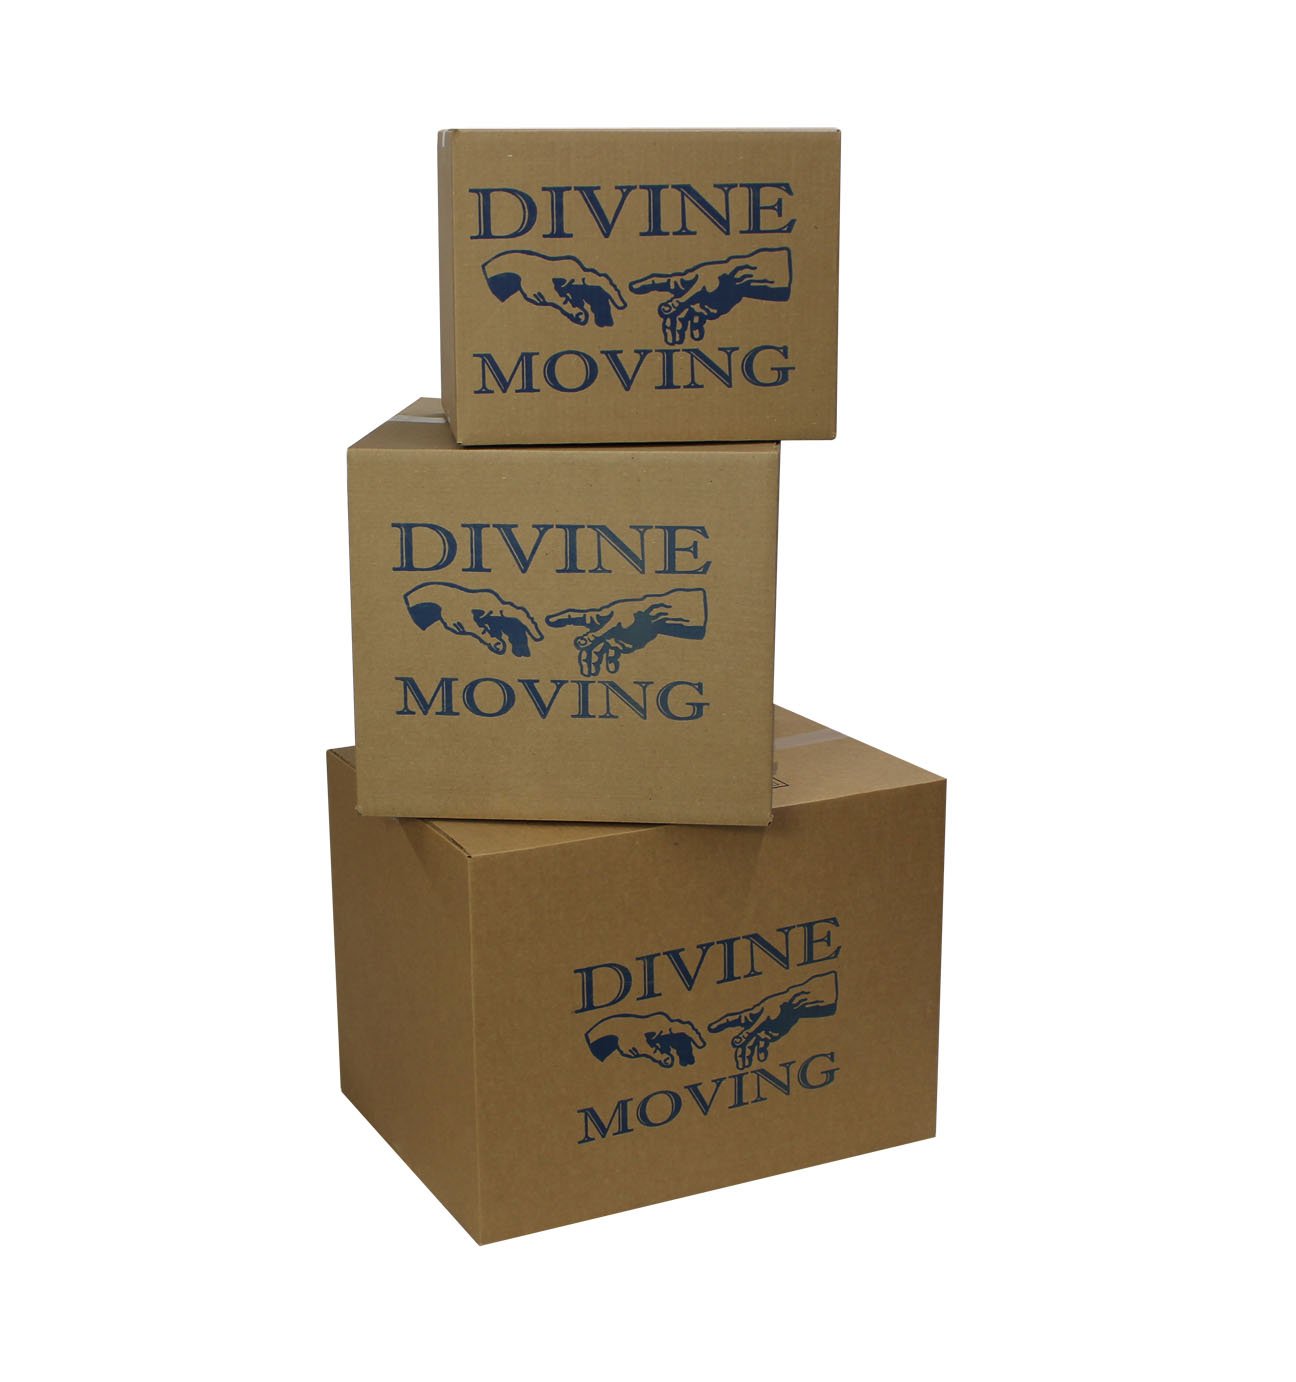 Moving and Storage services in NYC